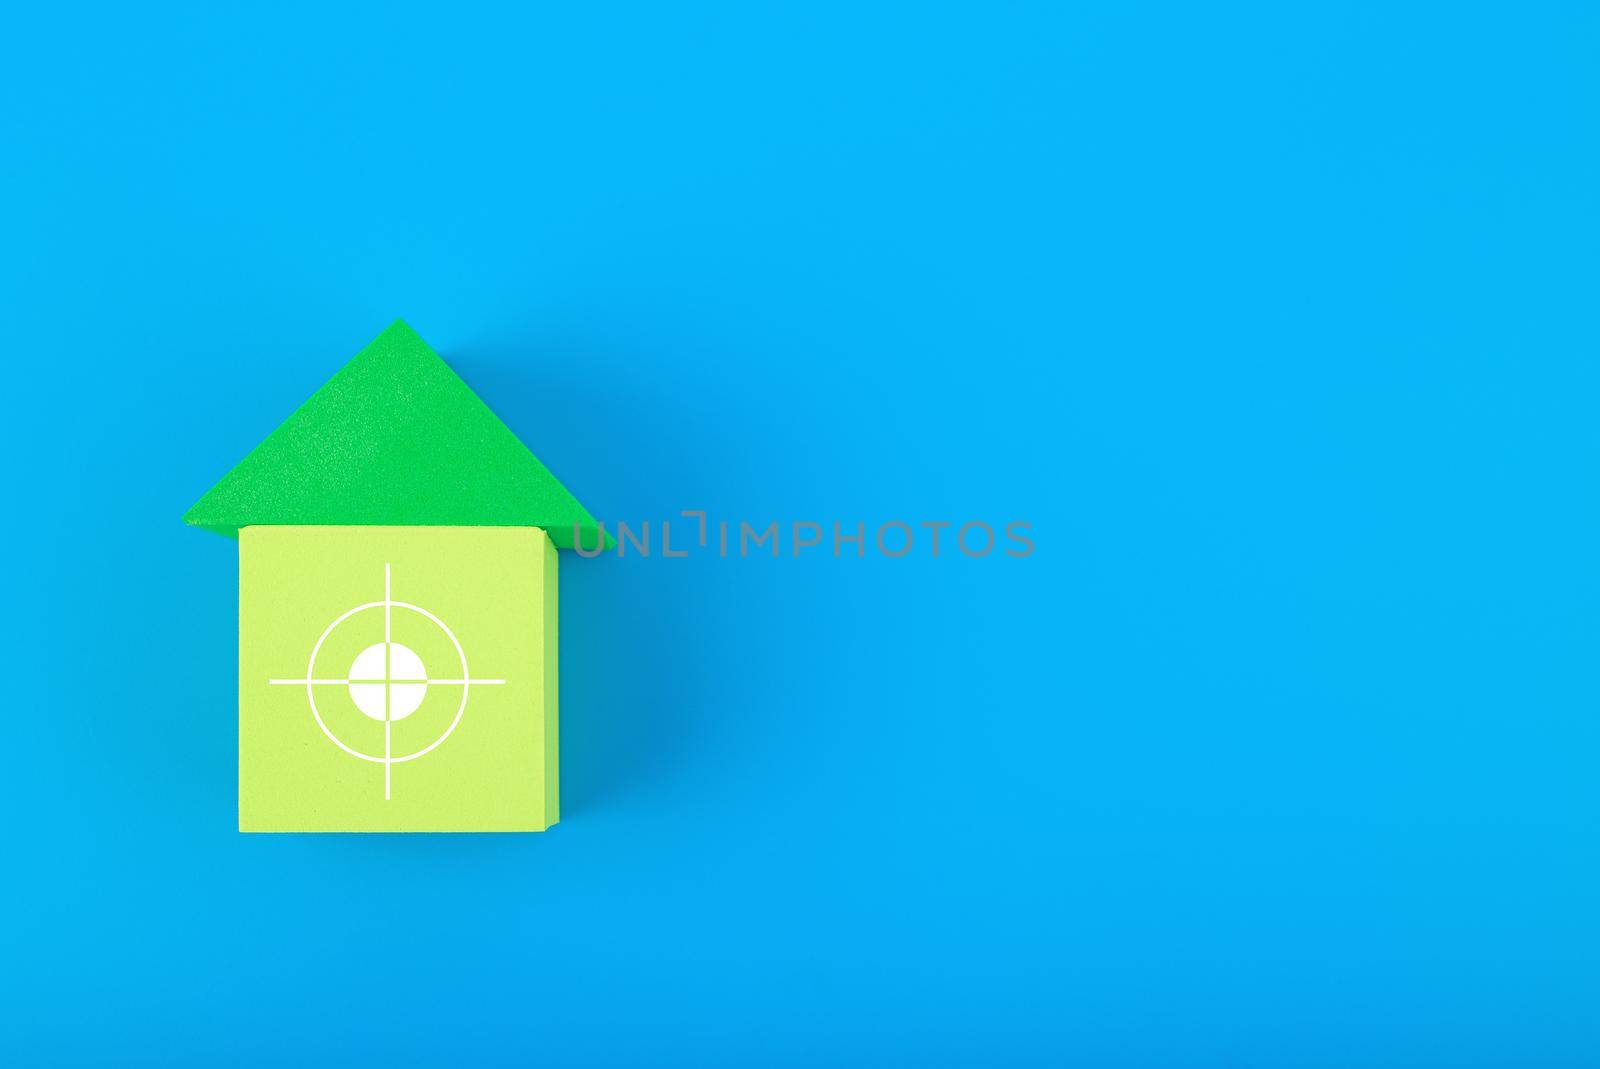 Mortgage, loan or saving money for home and investing in real estate trendy concept. Green toy house with white target in the middle against blue background with copy space